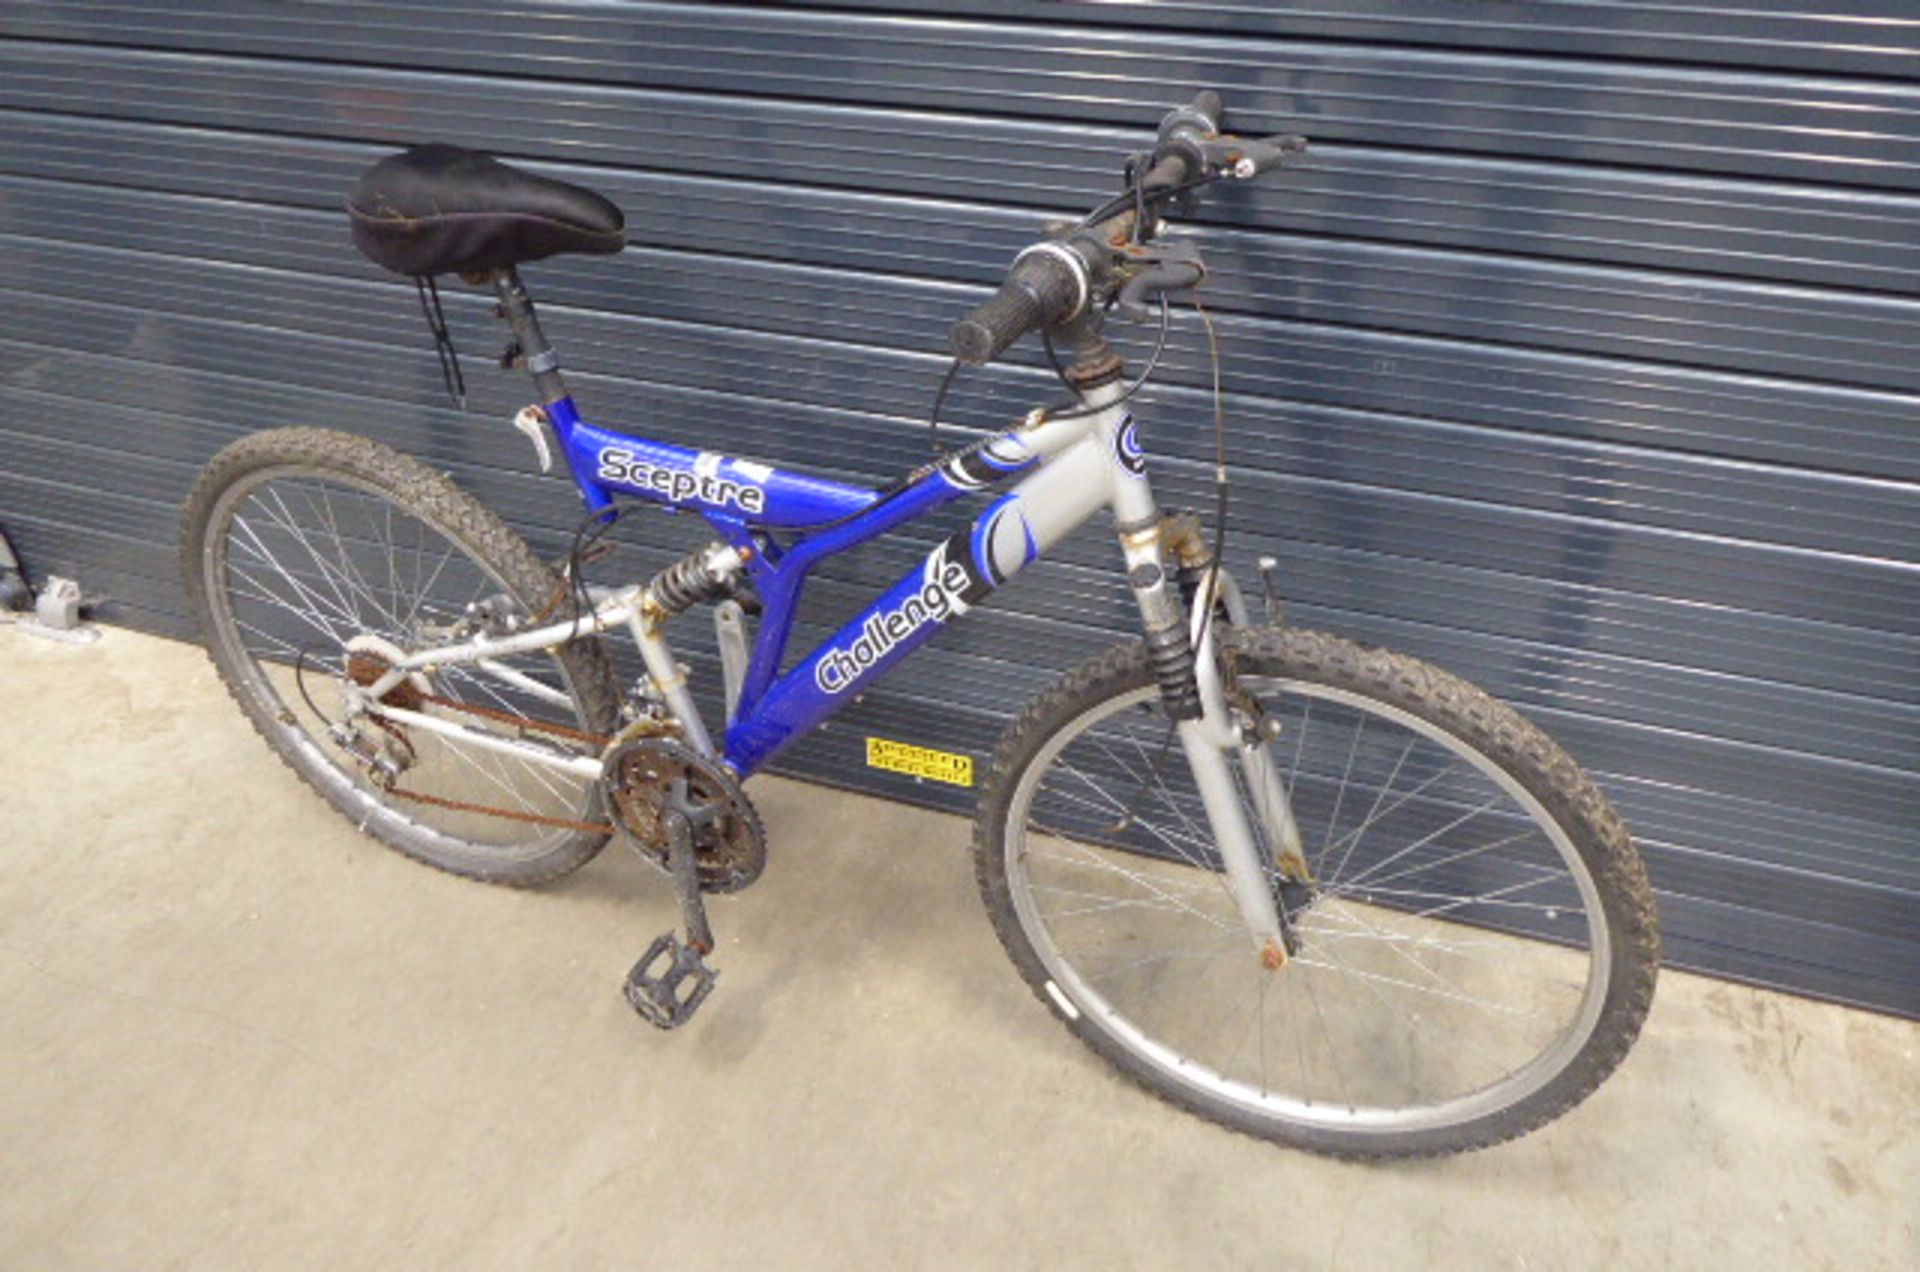 Challenge Scepter blue suspension mountain cycle - Image 2 of 3